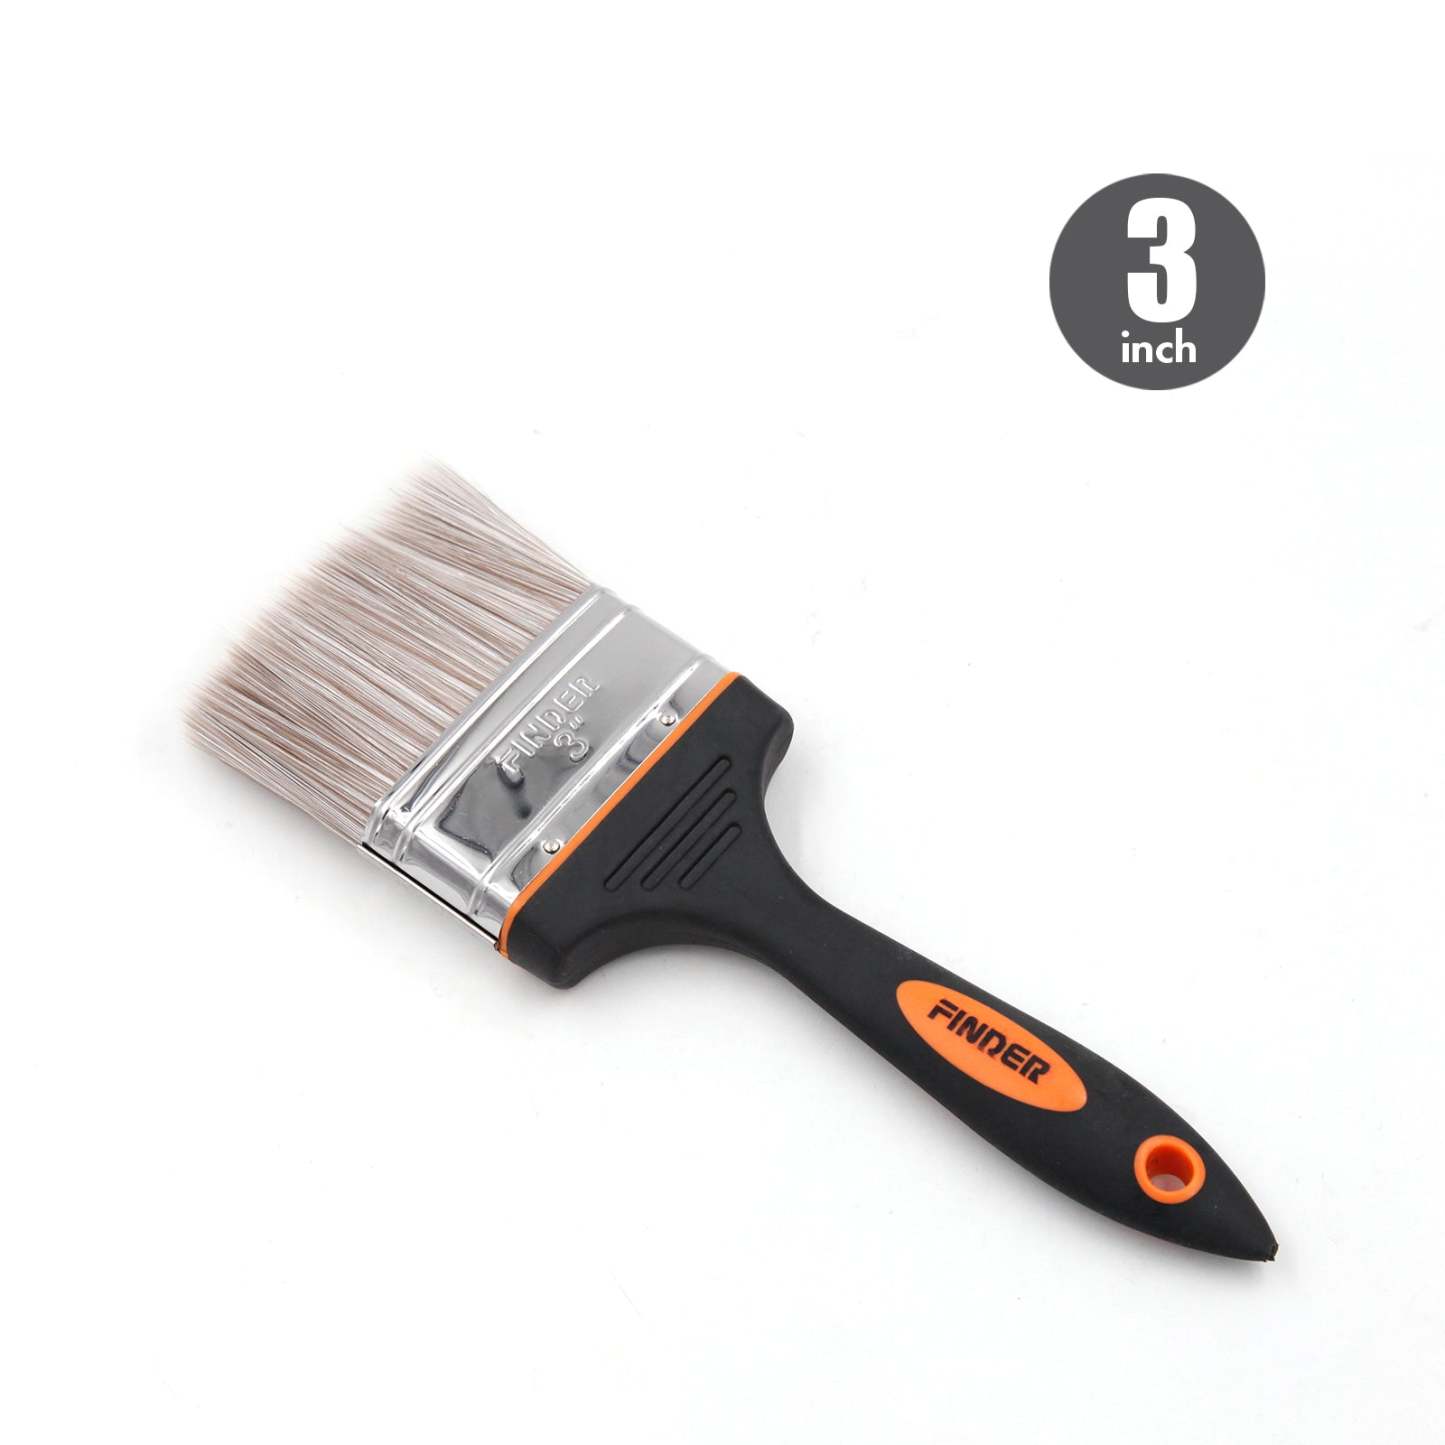 HOUZE - FINDER - 100% Polyester Painting Brush (3 Inch)